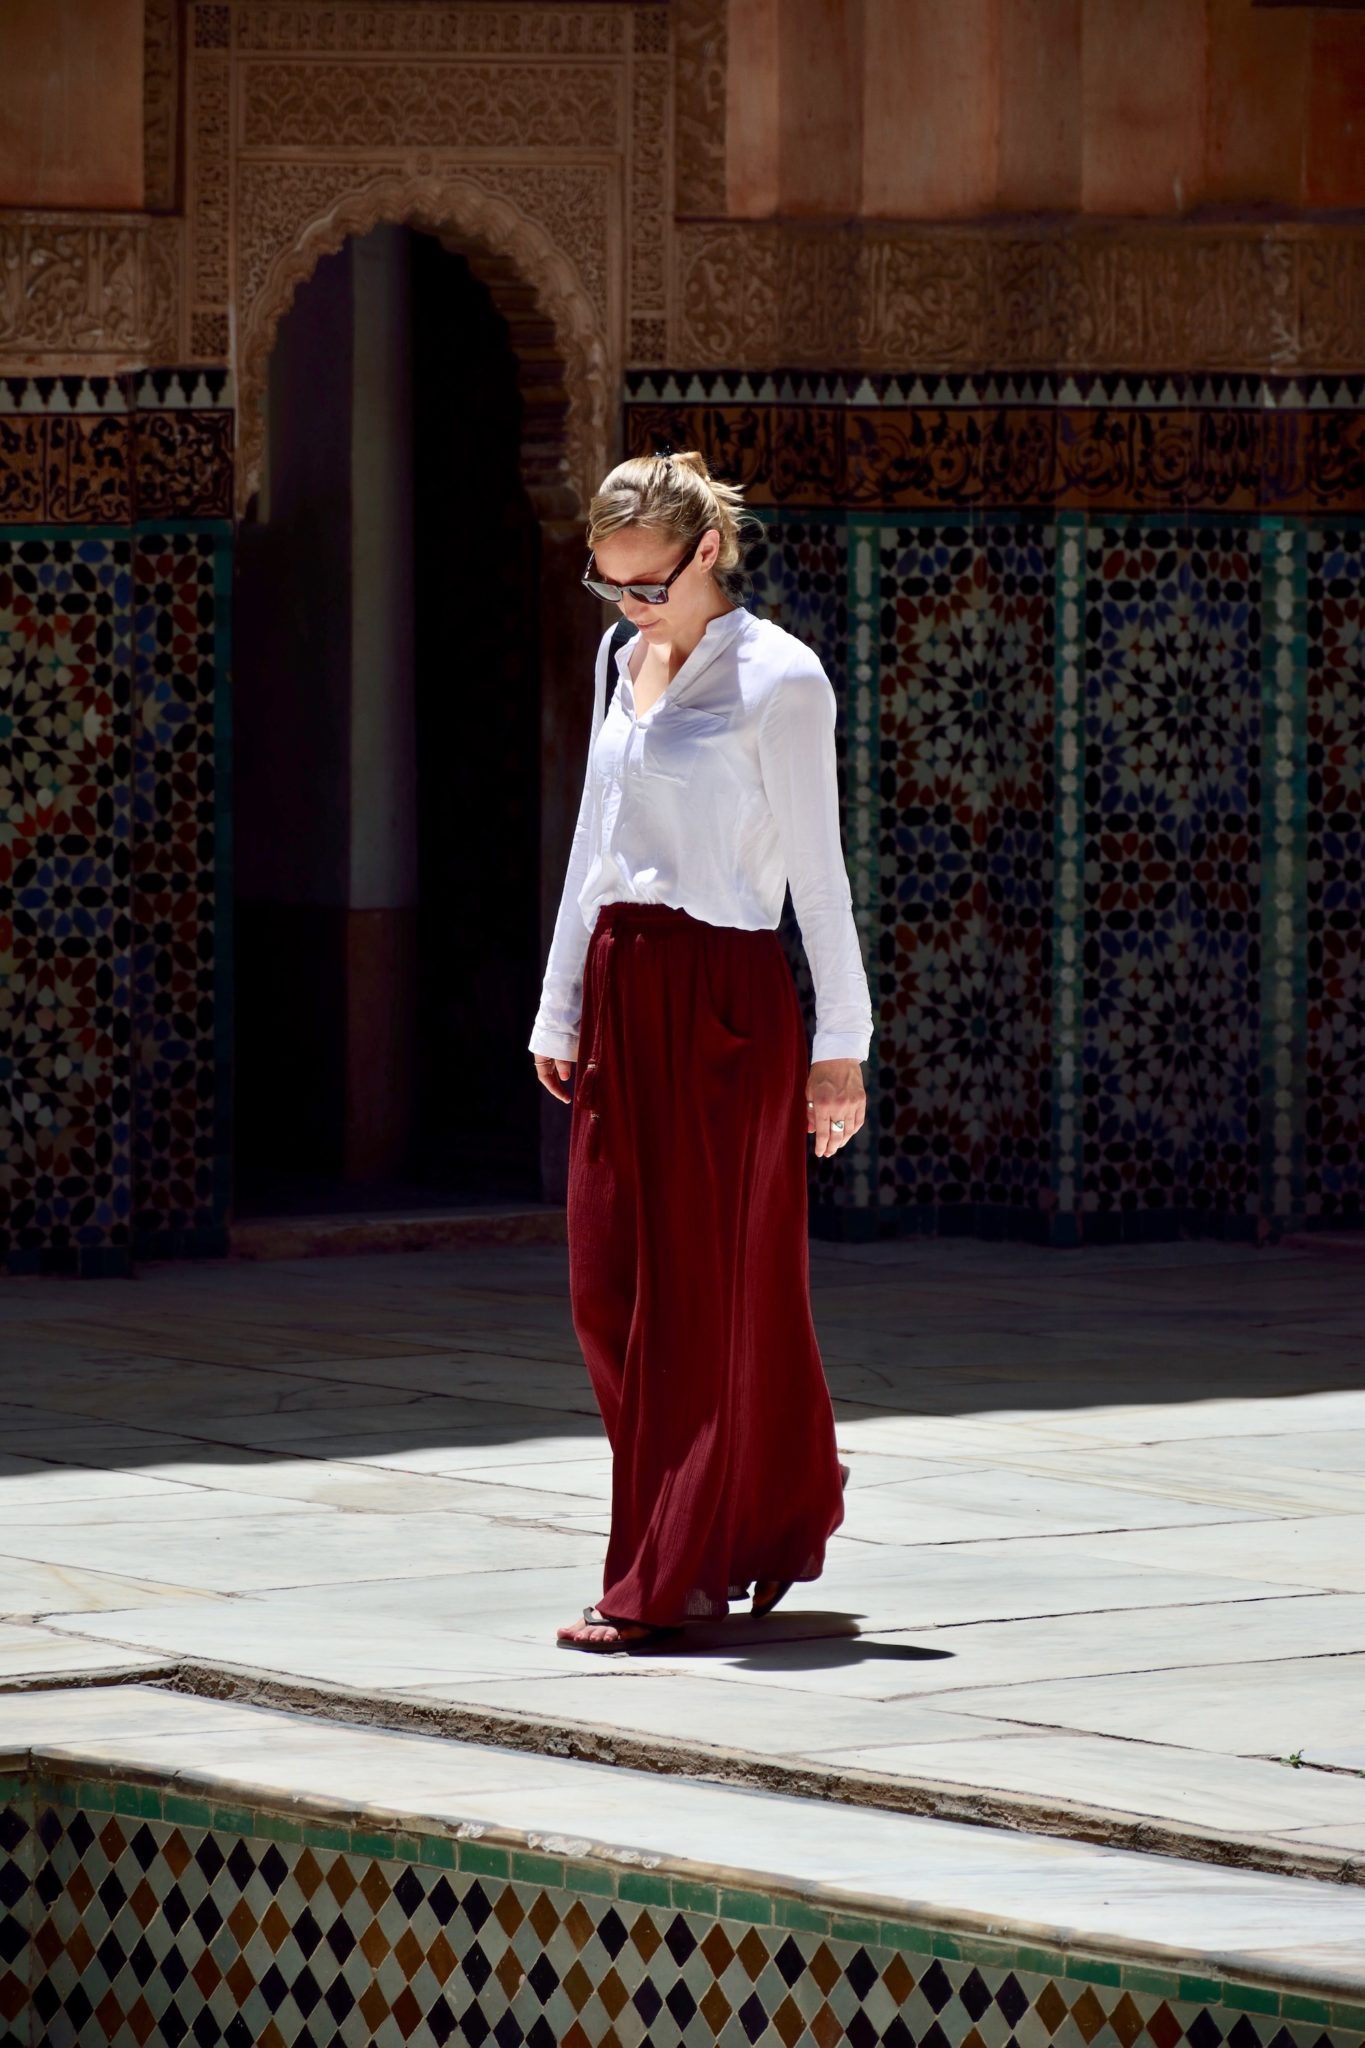 Hayley wearing a long skirt and top in Marrakech 